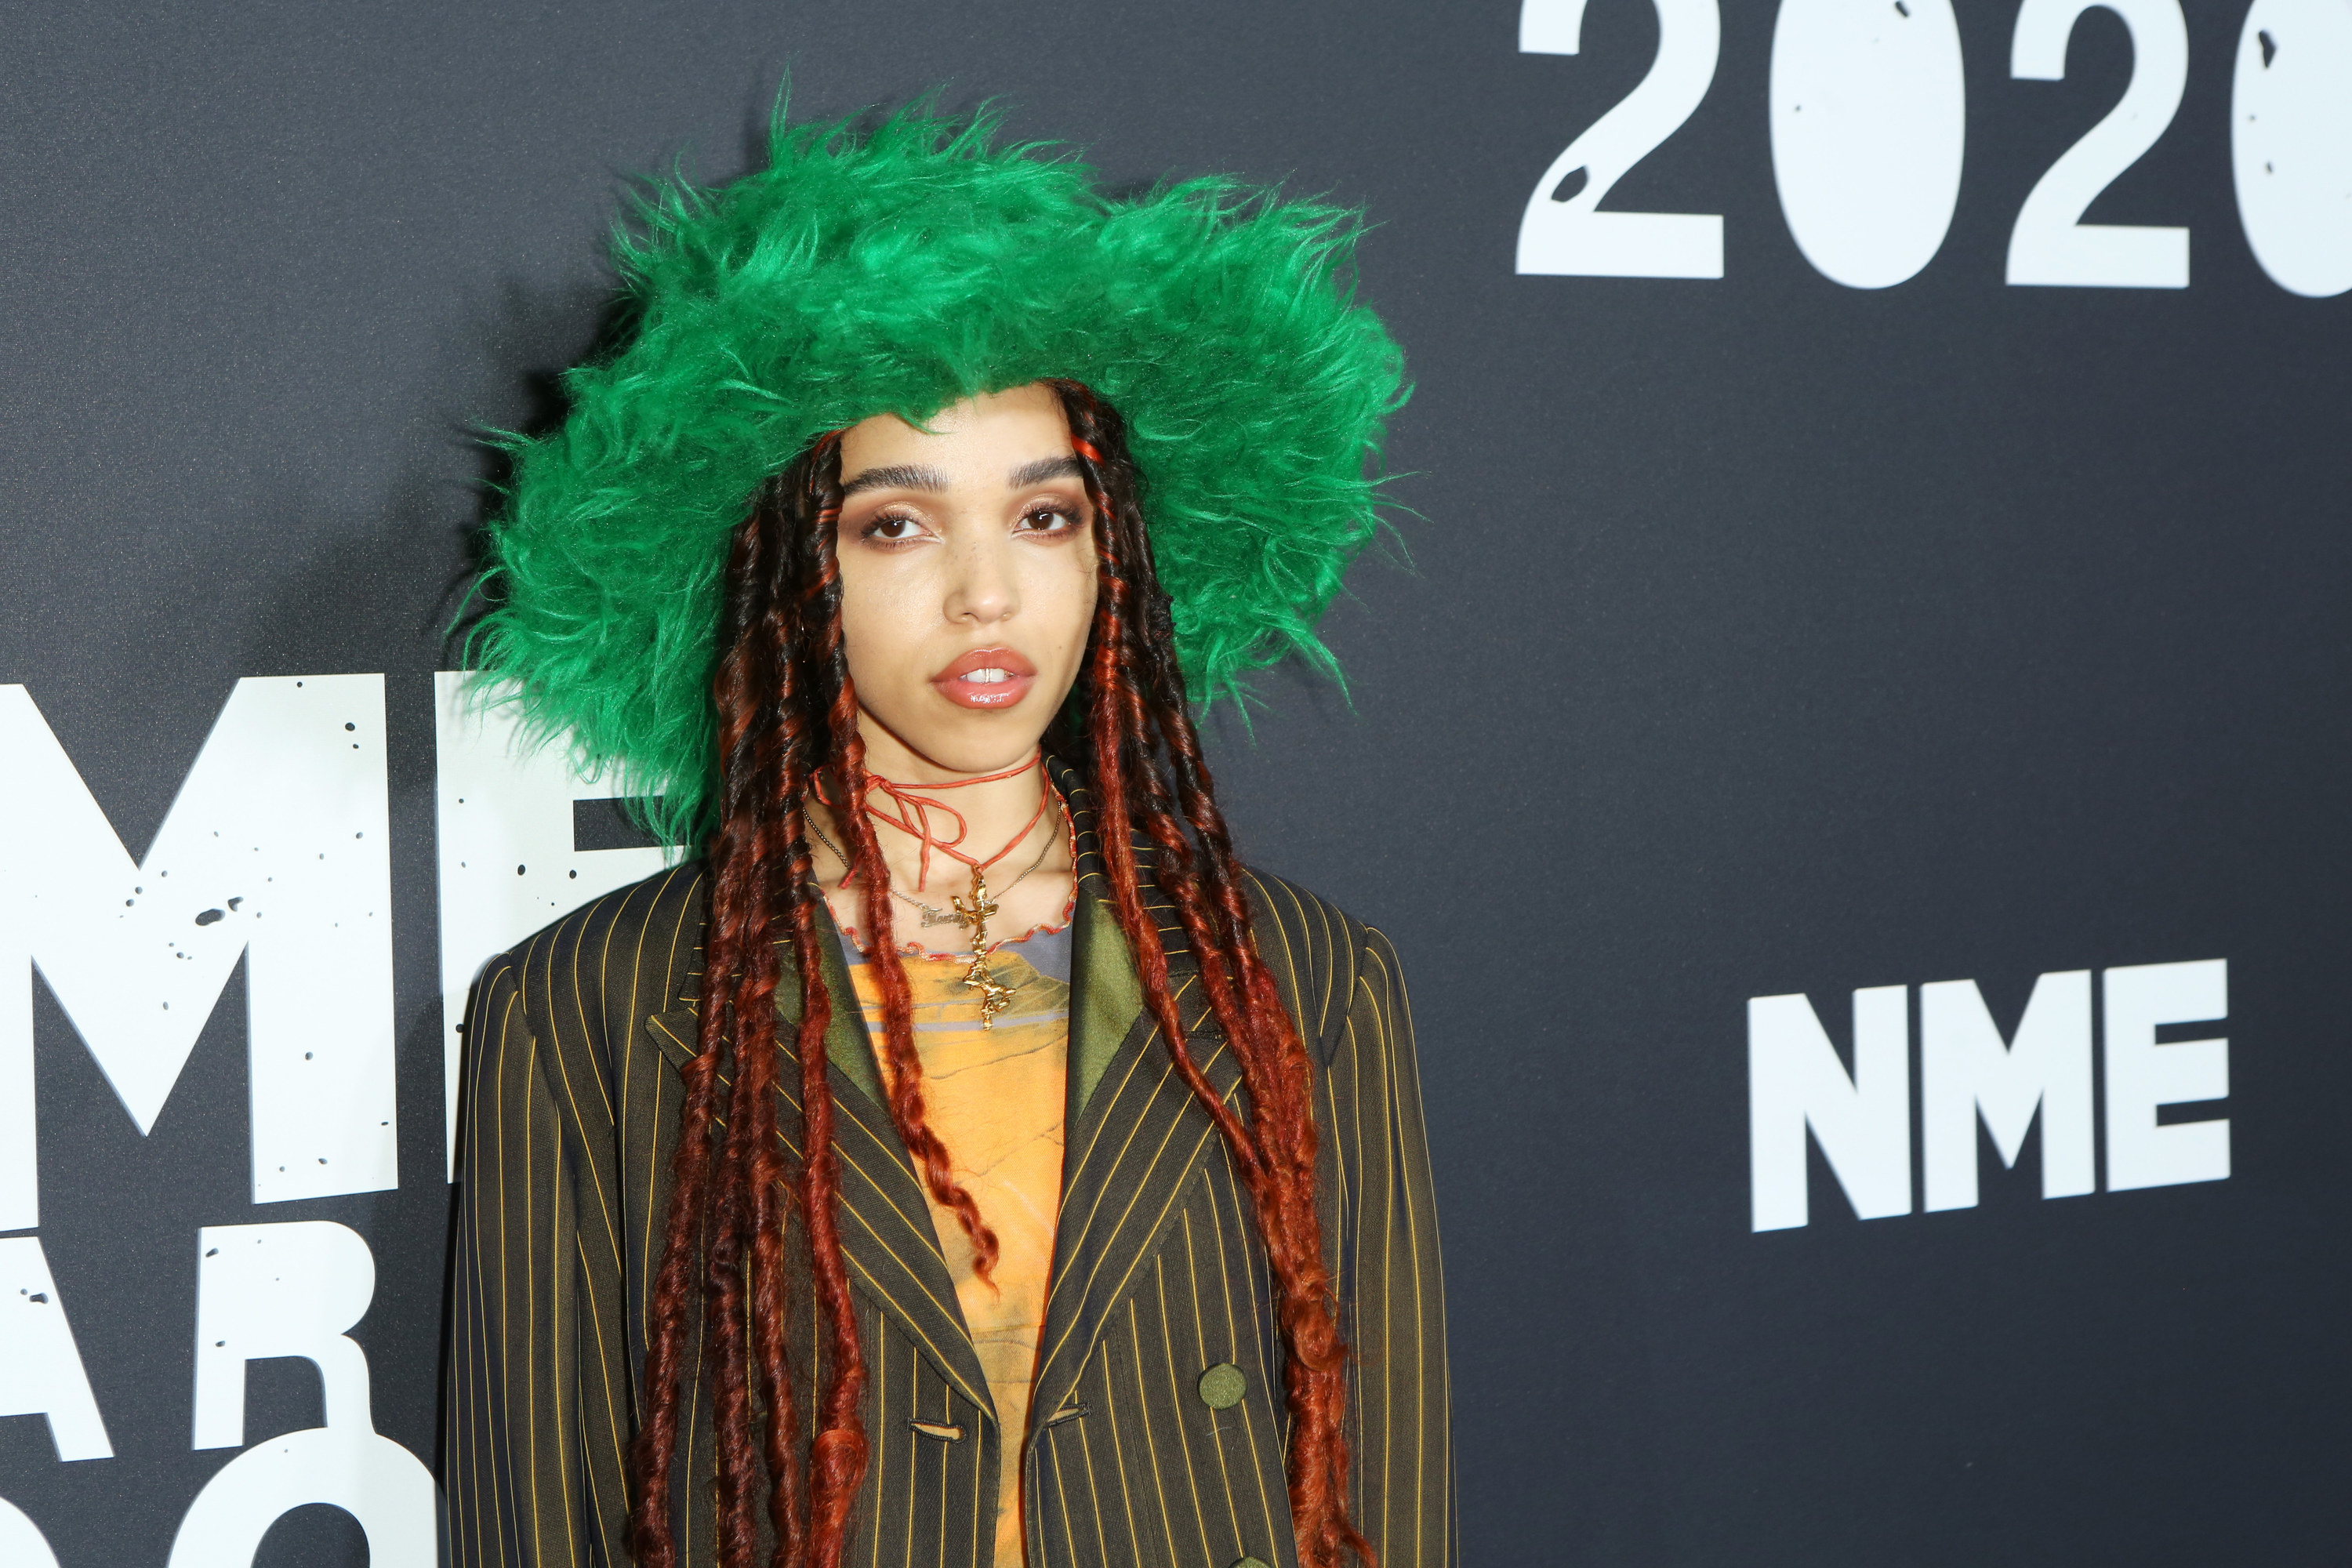 FKA Twigs attends The NME Awards 2020 wearing a wide-brimmed fuzzy hat and a blazer